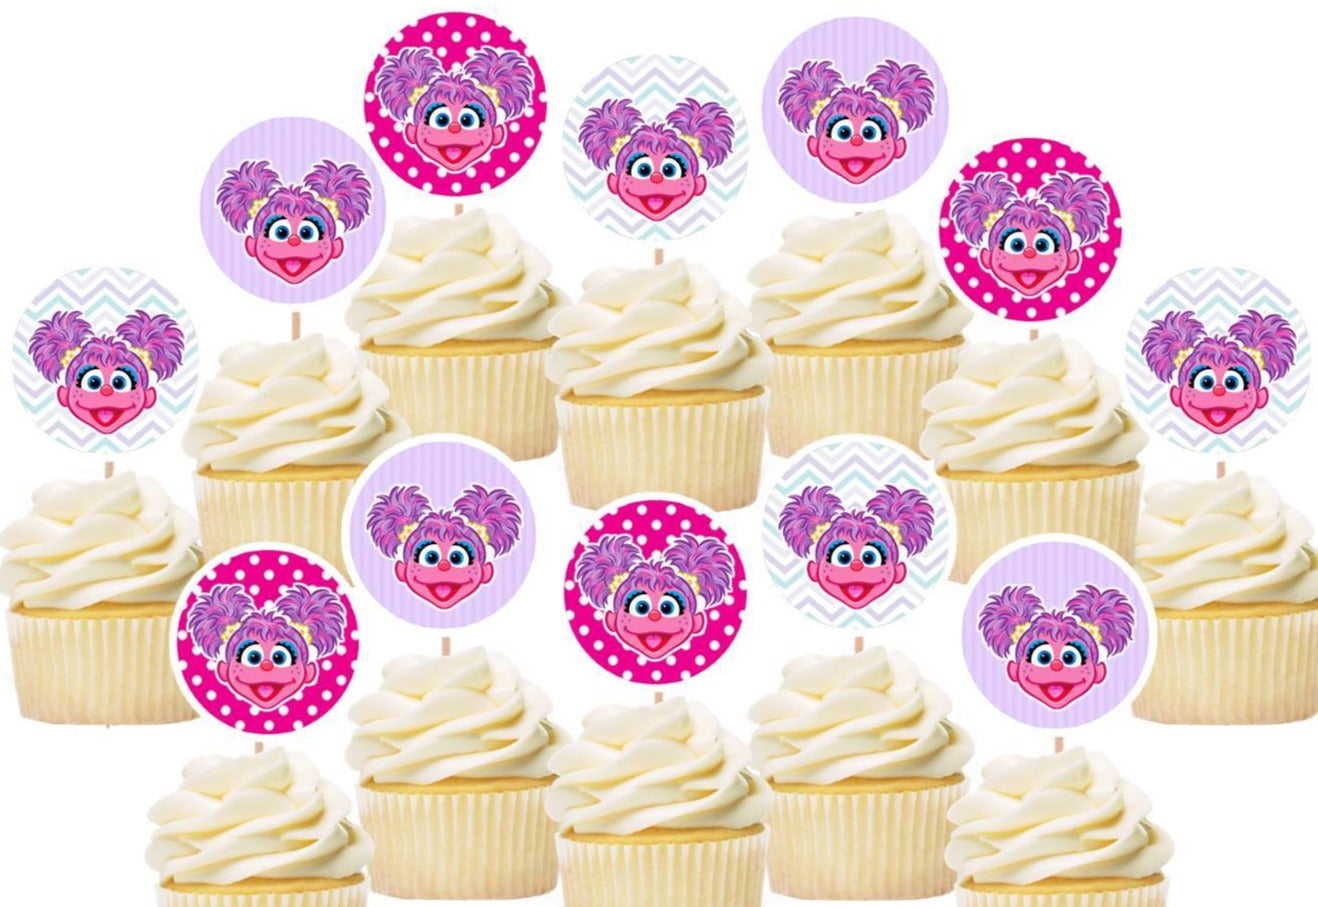 Abby Cadabby Cupcake Toppers